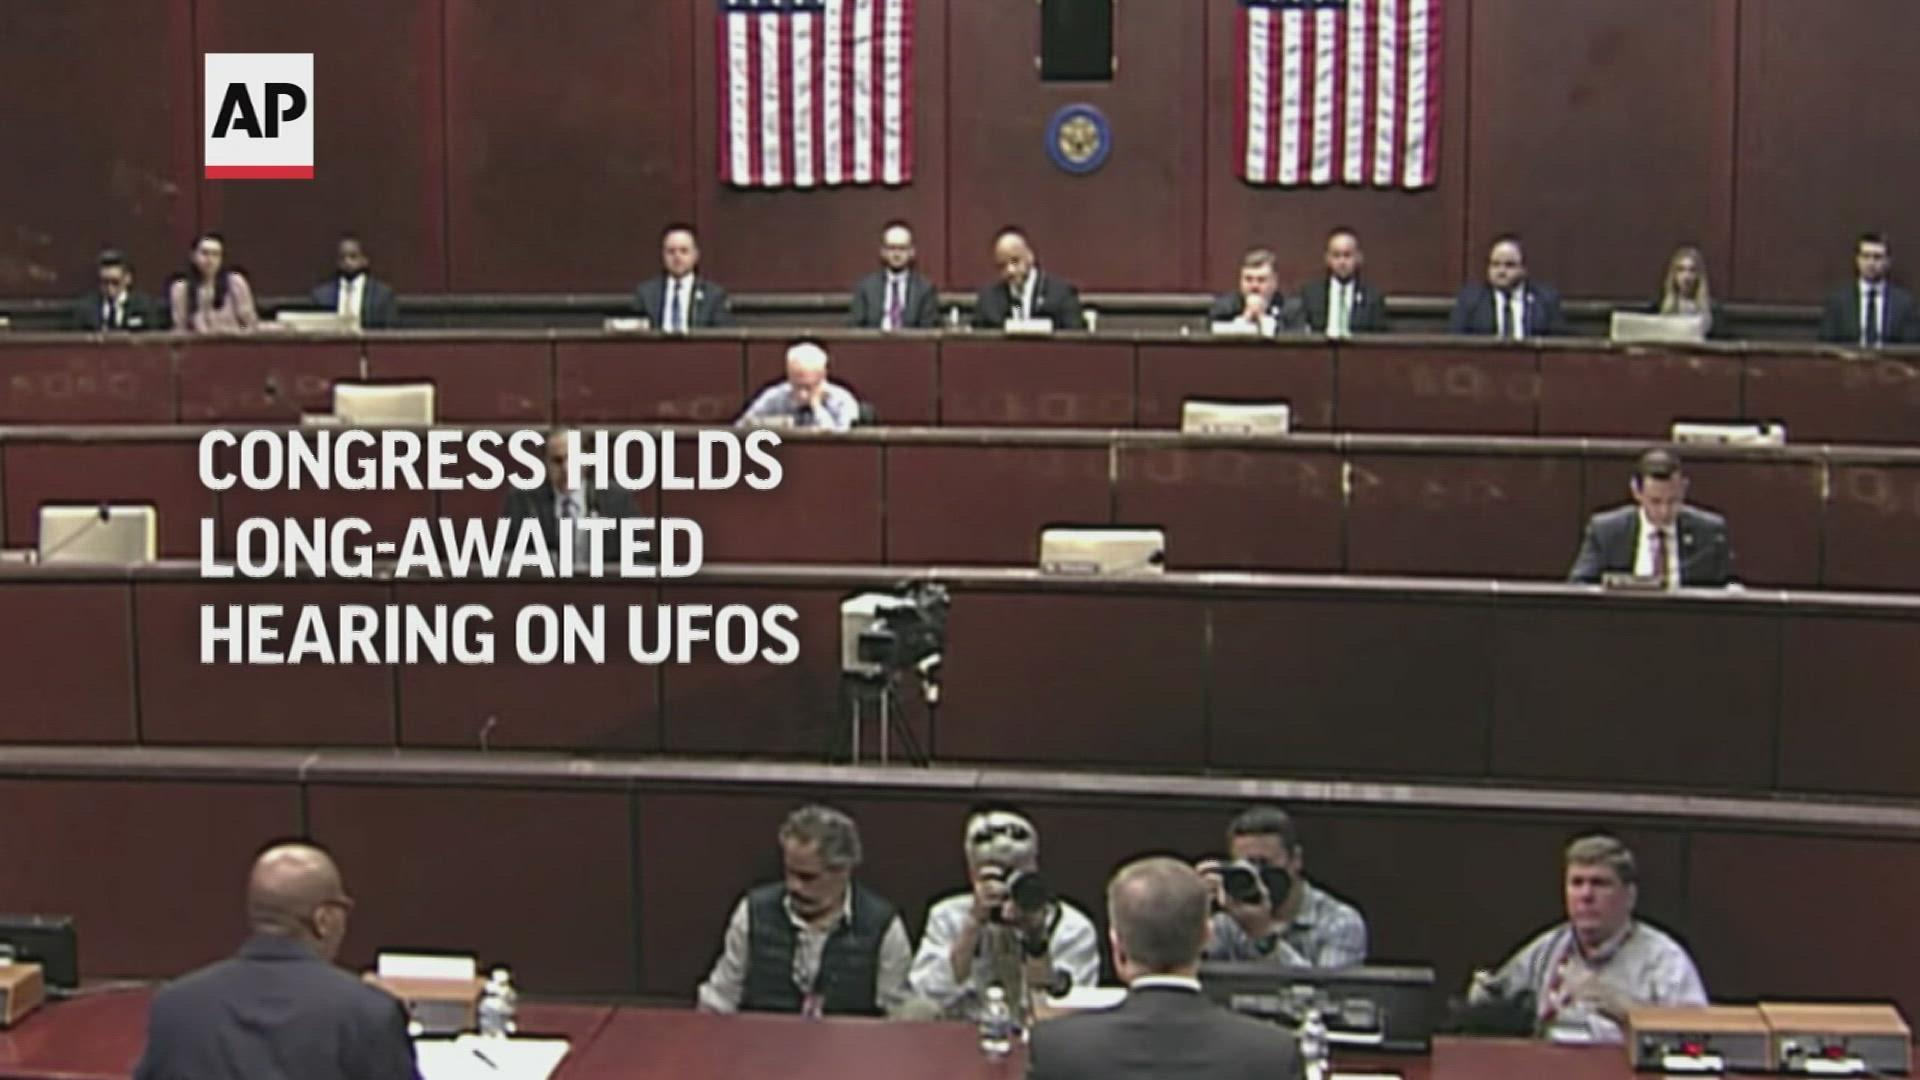 Pentagon officials said they have not confirmed the existence of extraterrestrial life.